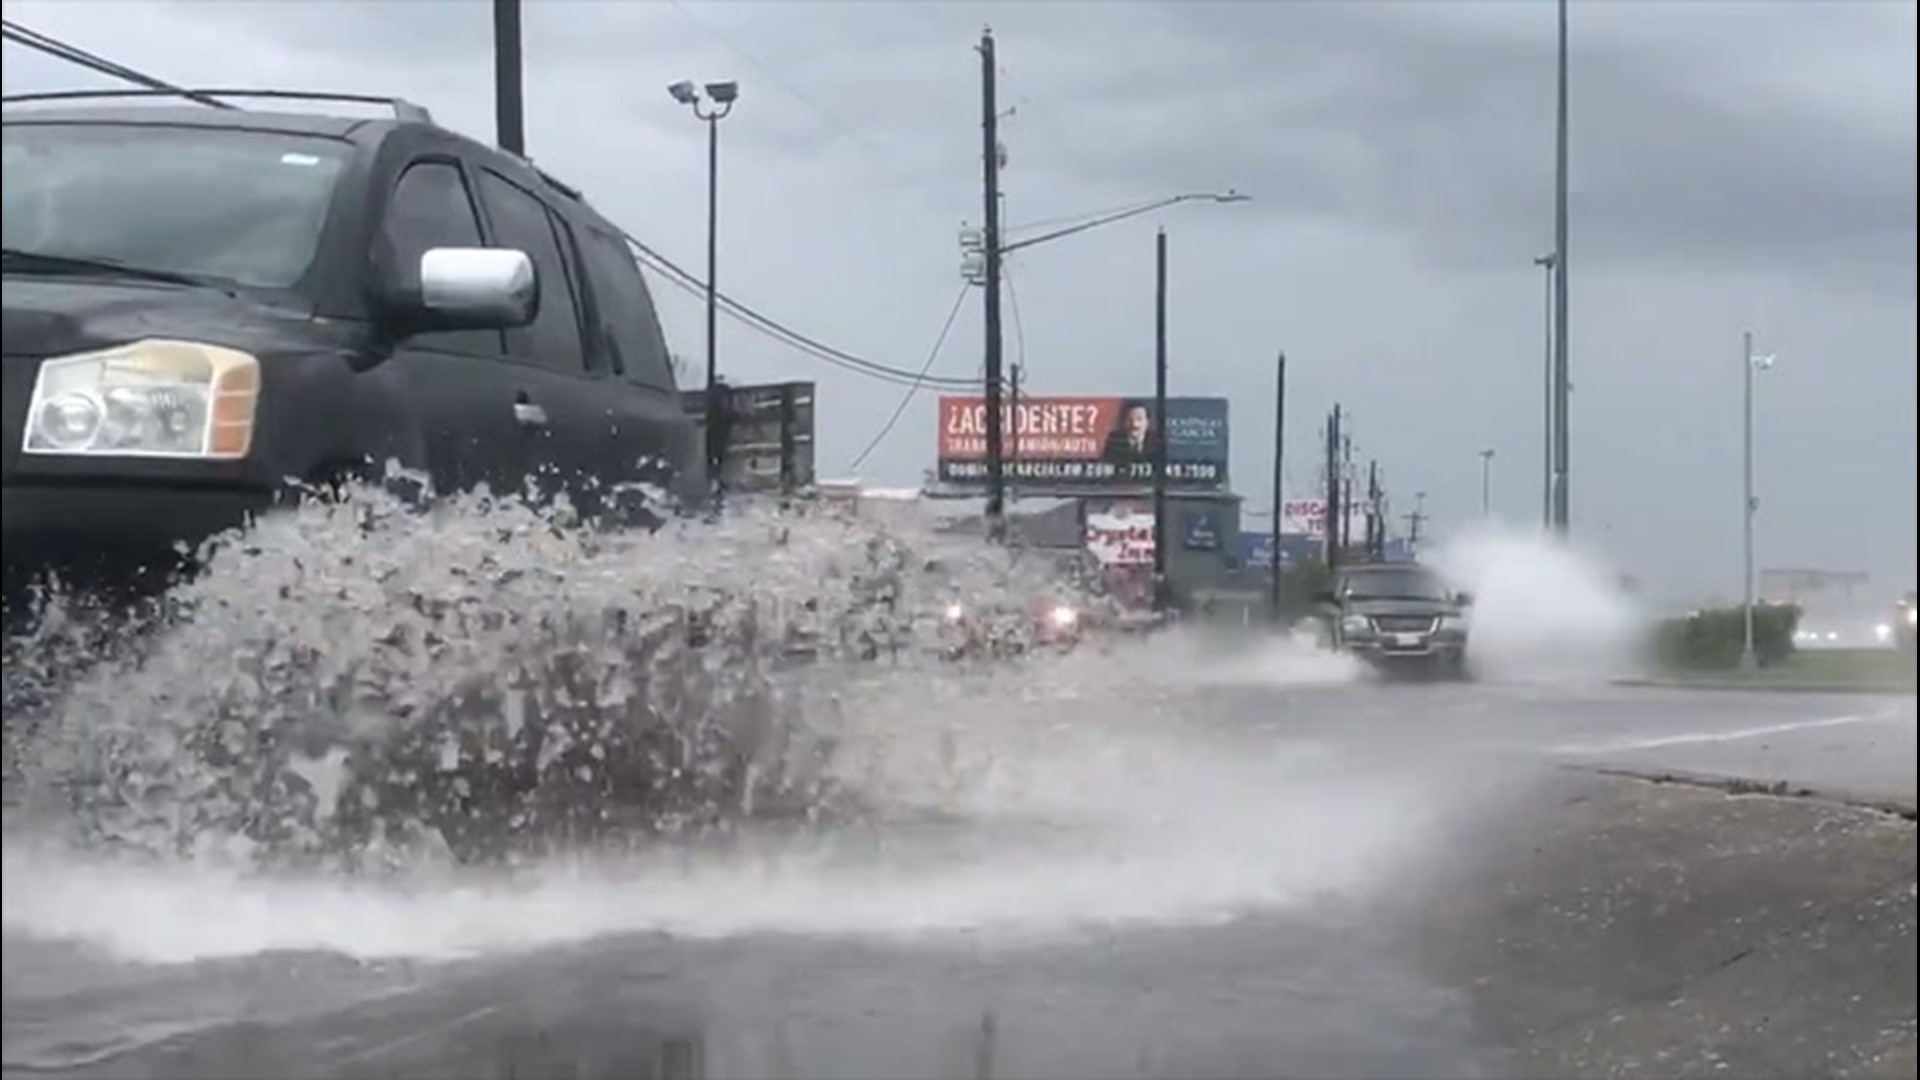 Strong rain showers and thunderstorms battered parts of the Gulf coast on Nov. 27, leading to flooded streets in Houston, Texas.